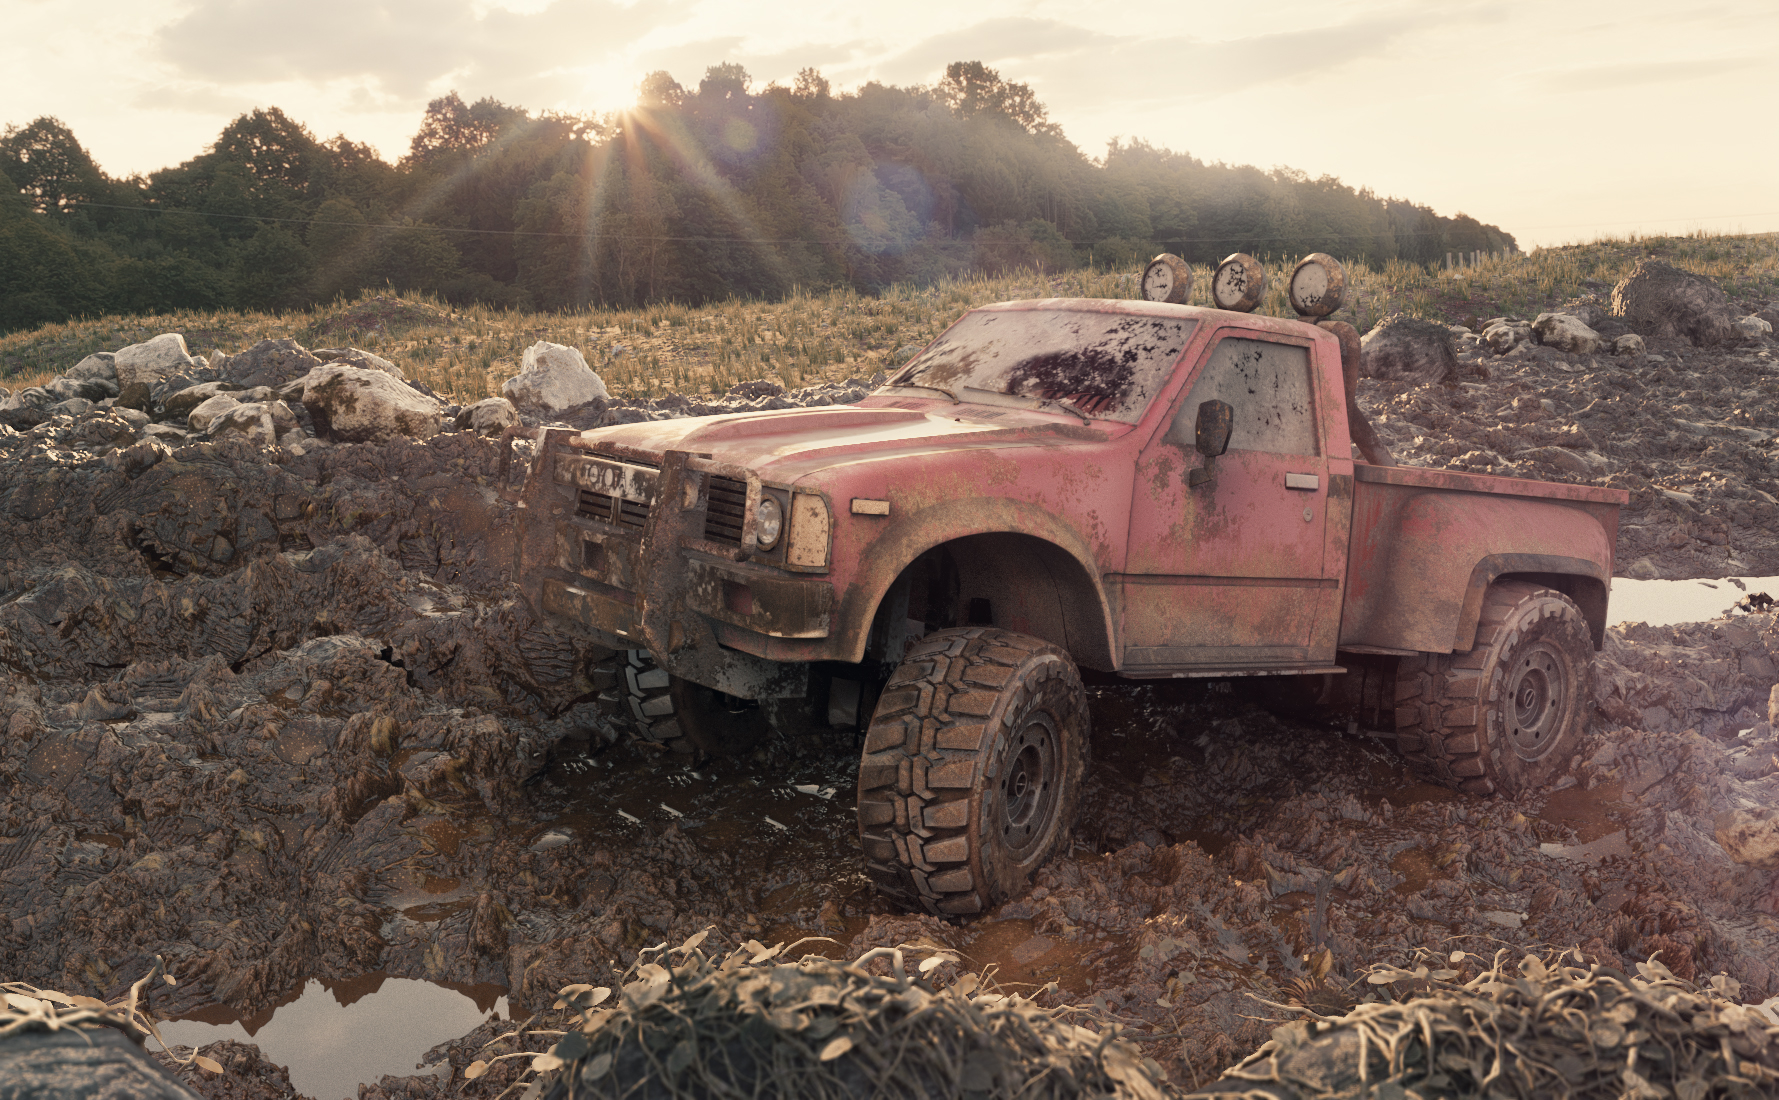 d photoshop ds max vray substance painter itoo GodRays in OffRoad ahmad ebrahimi